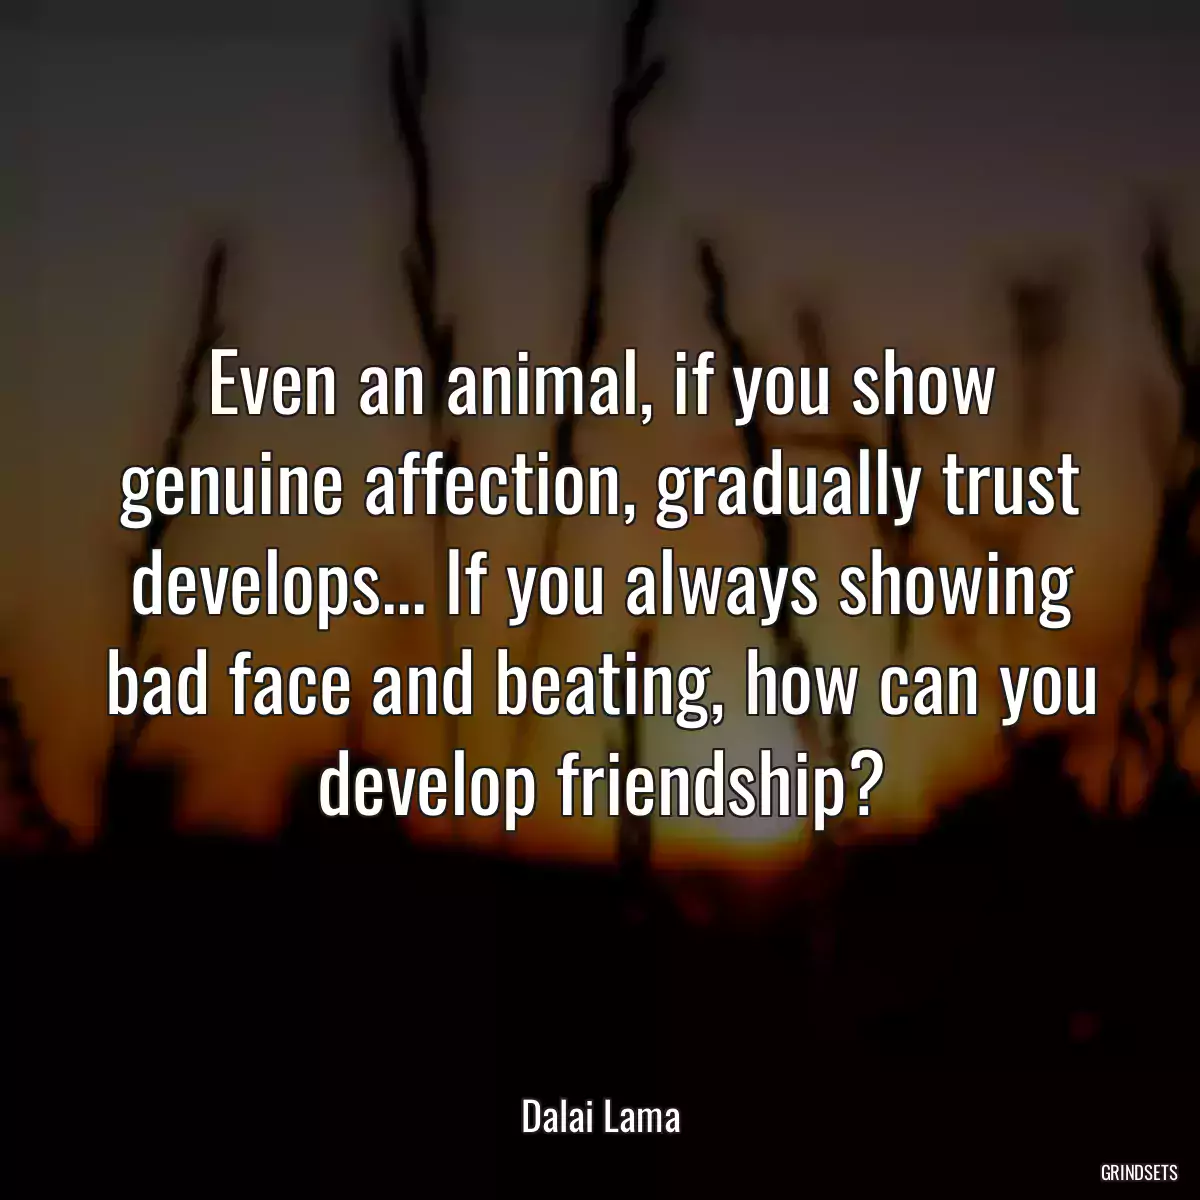 Even an animal, if you show genuine affection, gradually trust develops... If you always showing bad face and beating, how can you develop friendship?